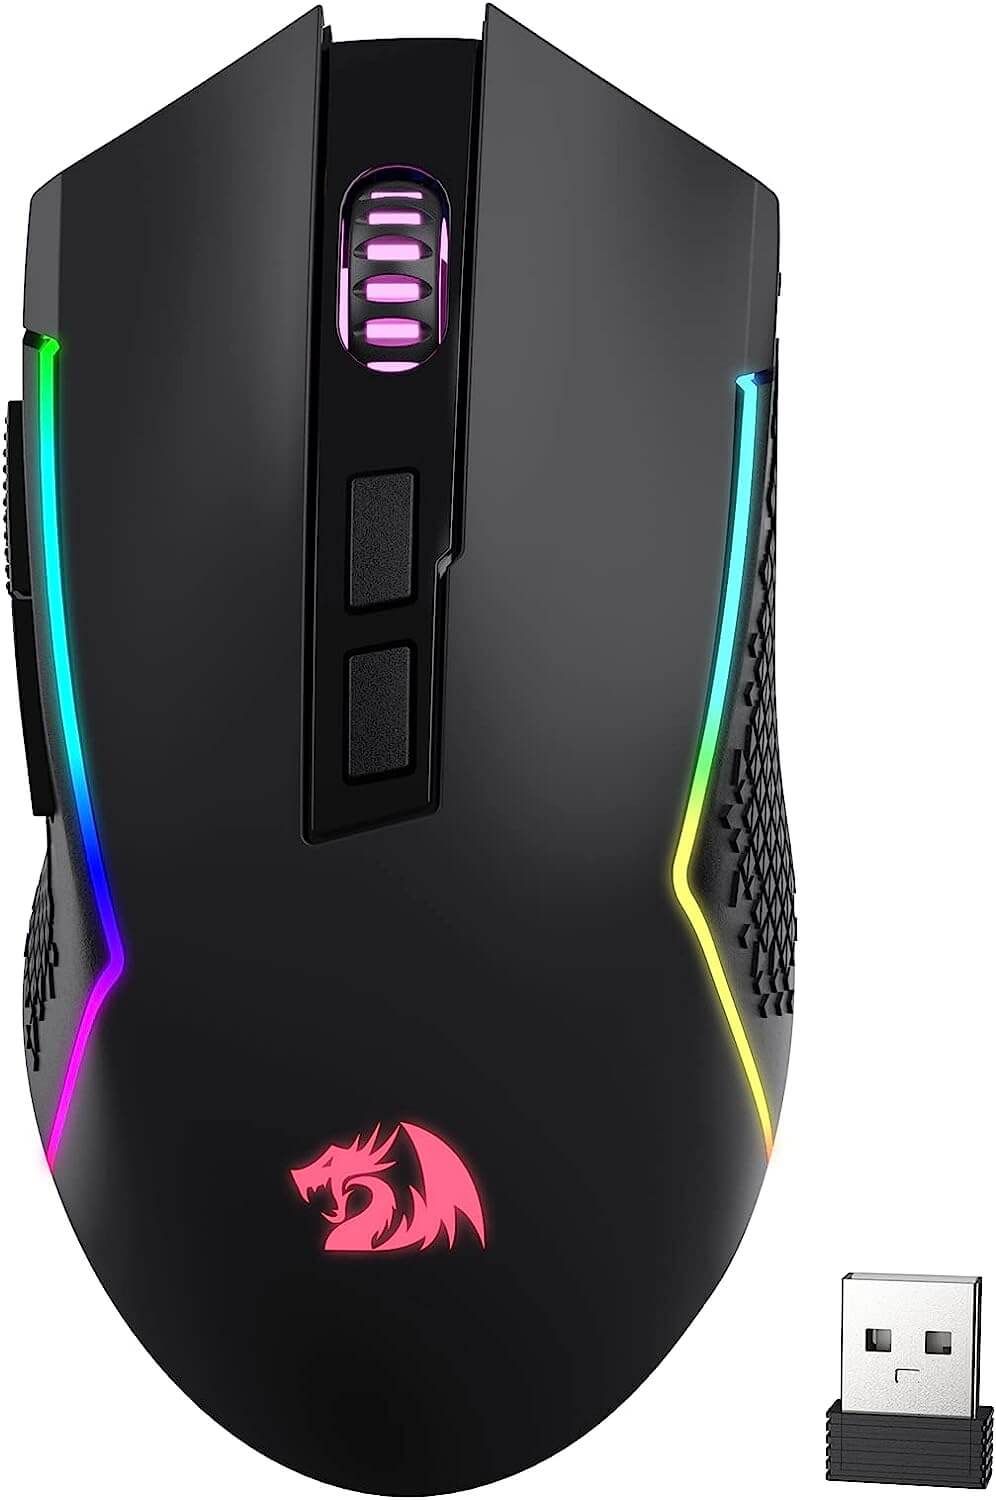 Redragon M693 Trident Pro Wireless Bluetooth Gaming Mouse, 8000 DPI Wired/Wireless Gamer Mouse w/ 3-Mode Connection, BT & 2.4G Wireless, 7 Macro Buttons, Durable Power Capacity for PC/Mac/Laptop